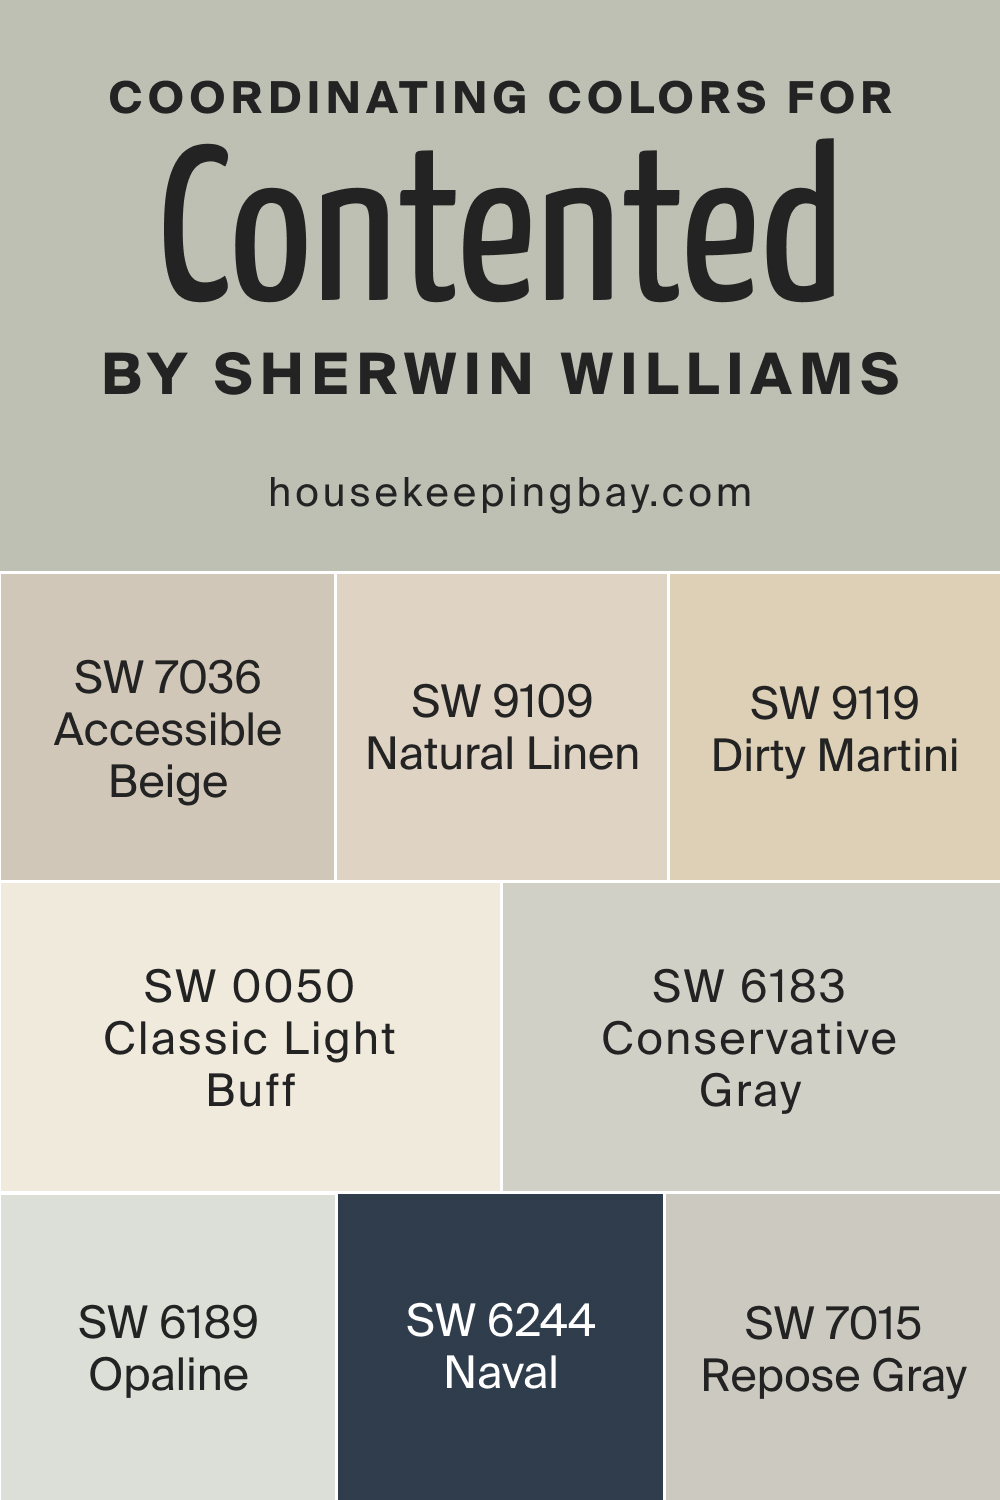 Coordinating Colors for SW 6191 Contented by Sherwin Williams